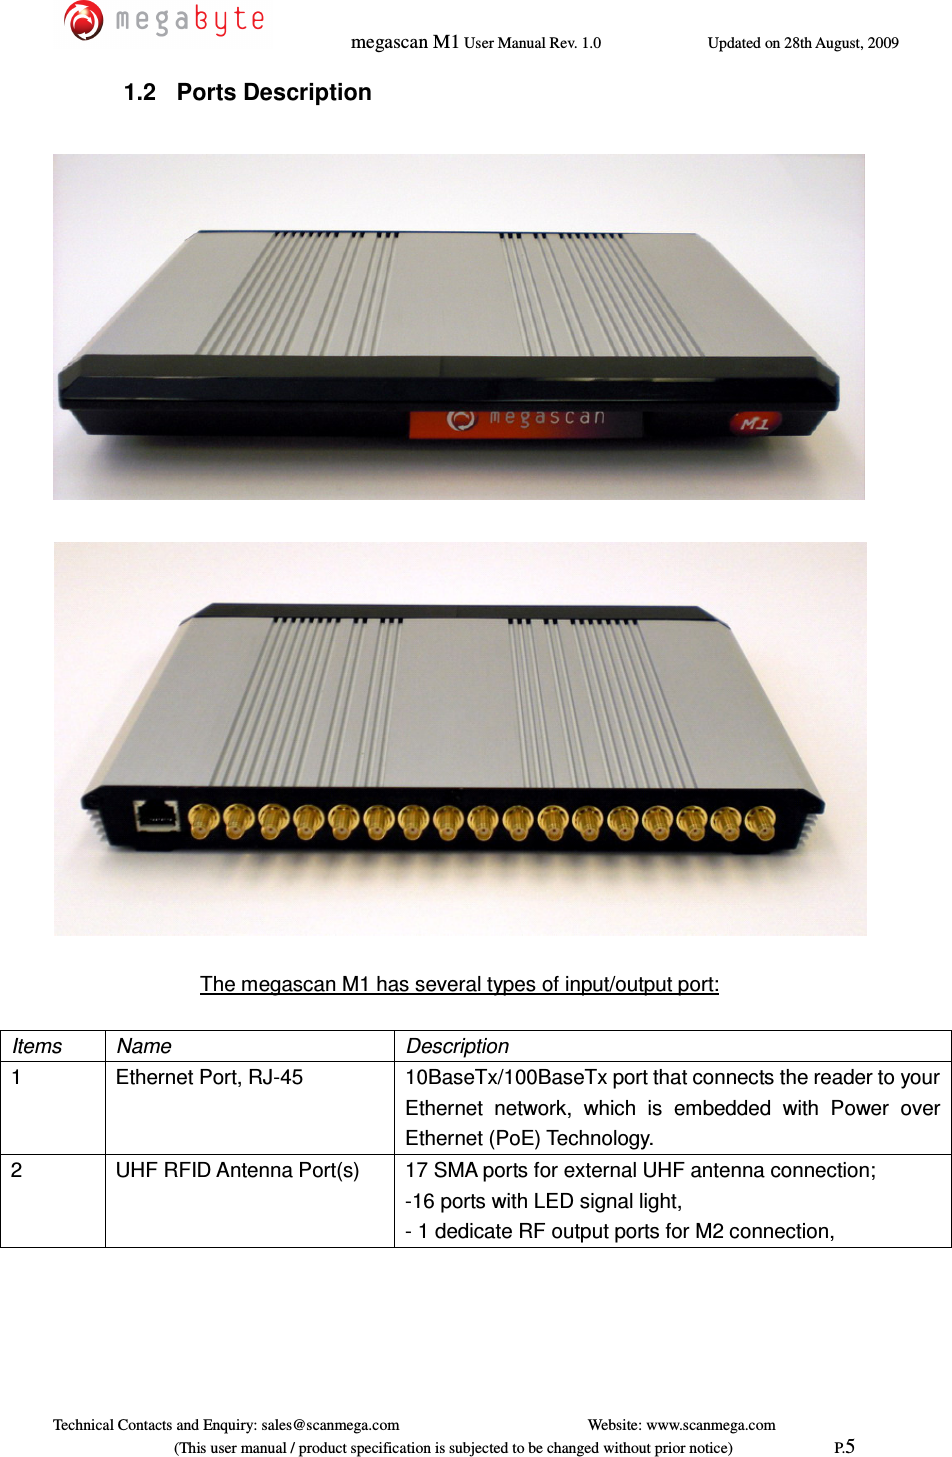   megascan M1 User Manual Rev. 1.0  Updated on 28th August, 2009     Technical Contacts and Enquiry: sales@scanmega.com          Website: www.scanmega.com                             (This user manual / product specification is subjected to be changed without prior notice)                          P.5 1.2  Ports Description      The megascan M1 has several types of input/output port:  Items  Name  Description 1  Ethernet Port, RJ-45  10BaseTx/100BaseTx port that connects the reader to your Ethernet  network,  which  is  embedded  with  Power  over Ethernet (PoE) Technology. 2  UHF RFID Antenna Port(s)      17 SMA ports for external UHF antenna connection; -16 ports with LED signal light, - 1 dedicate RF output ports for M2 connection, 